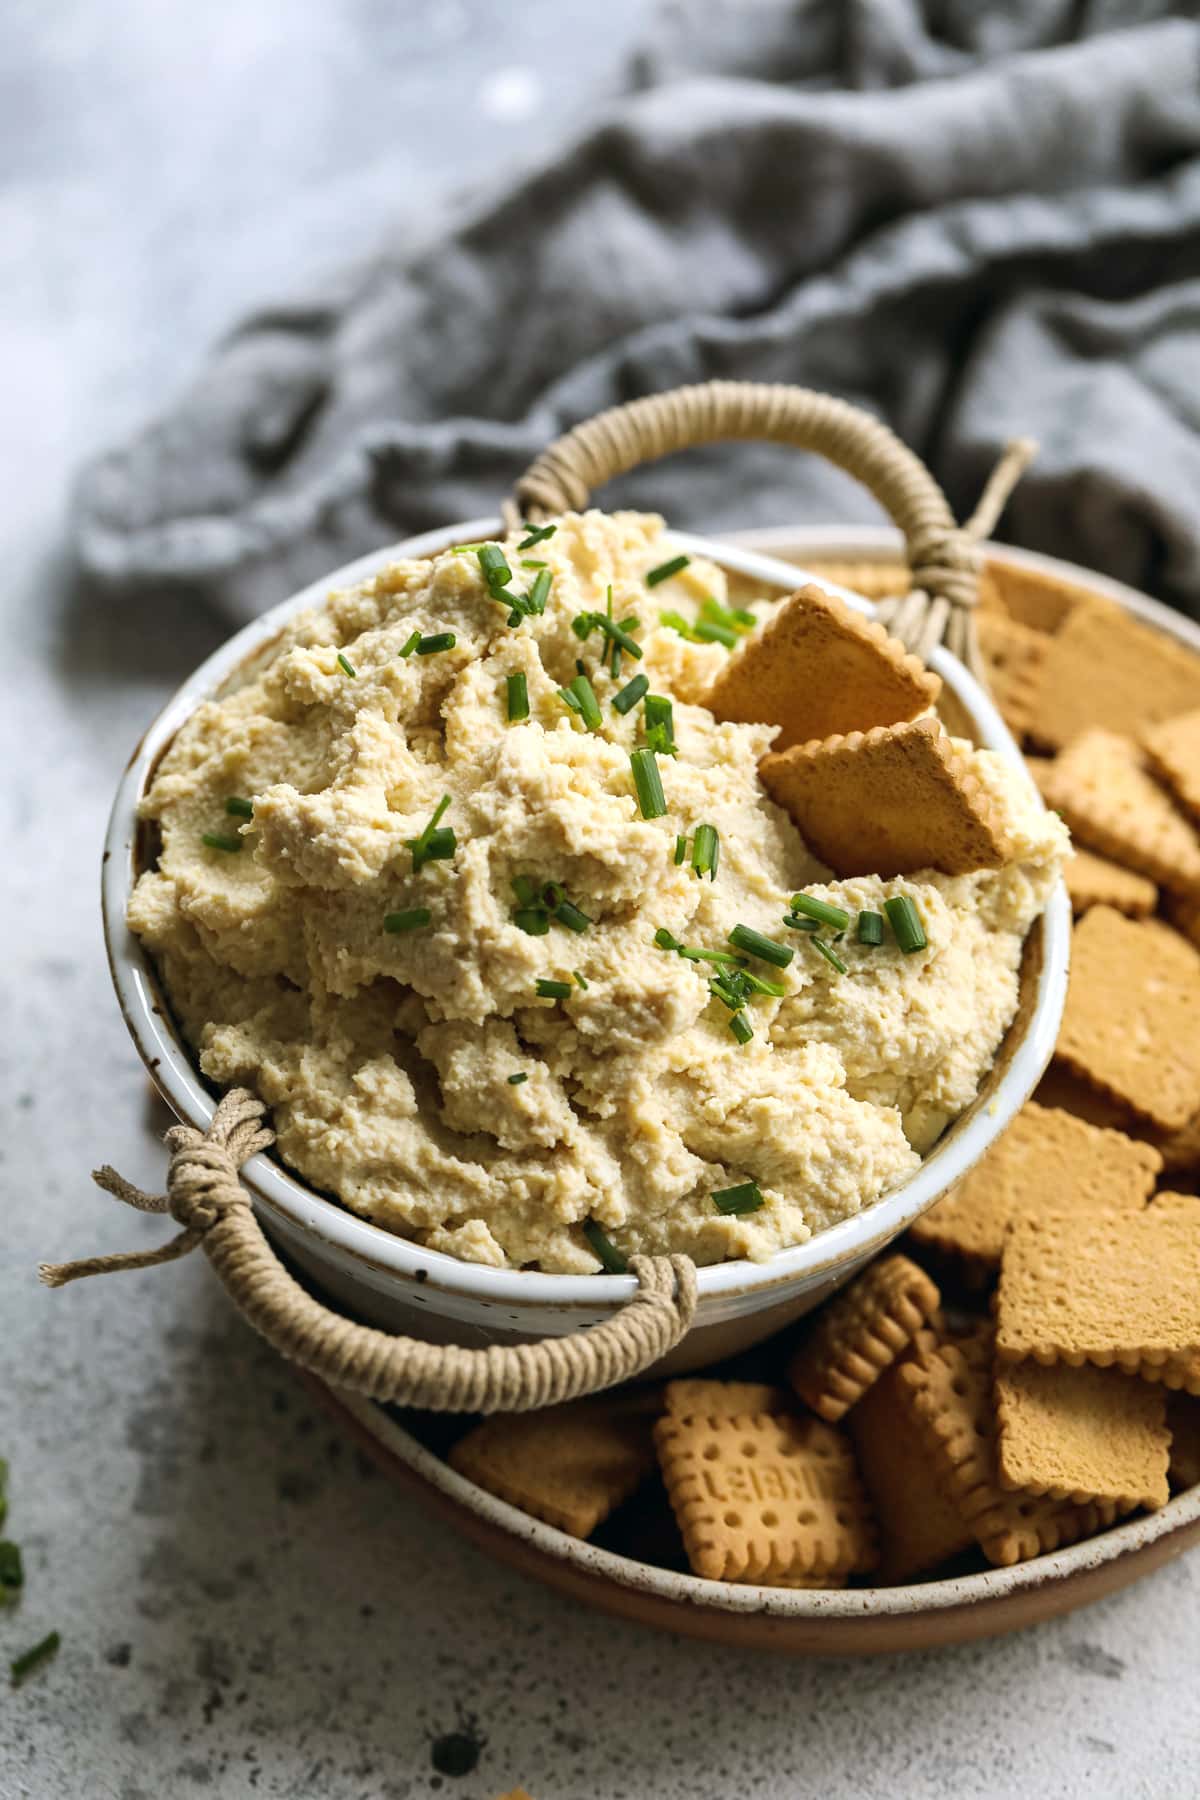 Vegan tofu ricotta in a bowl with crackers.